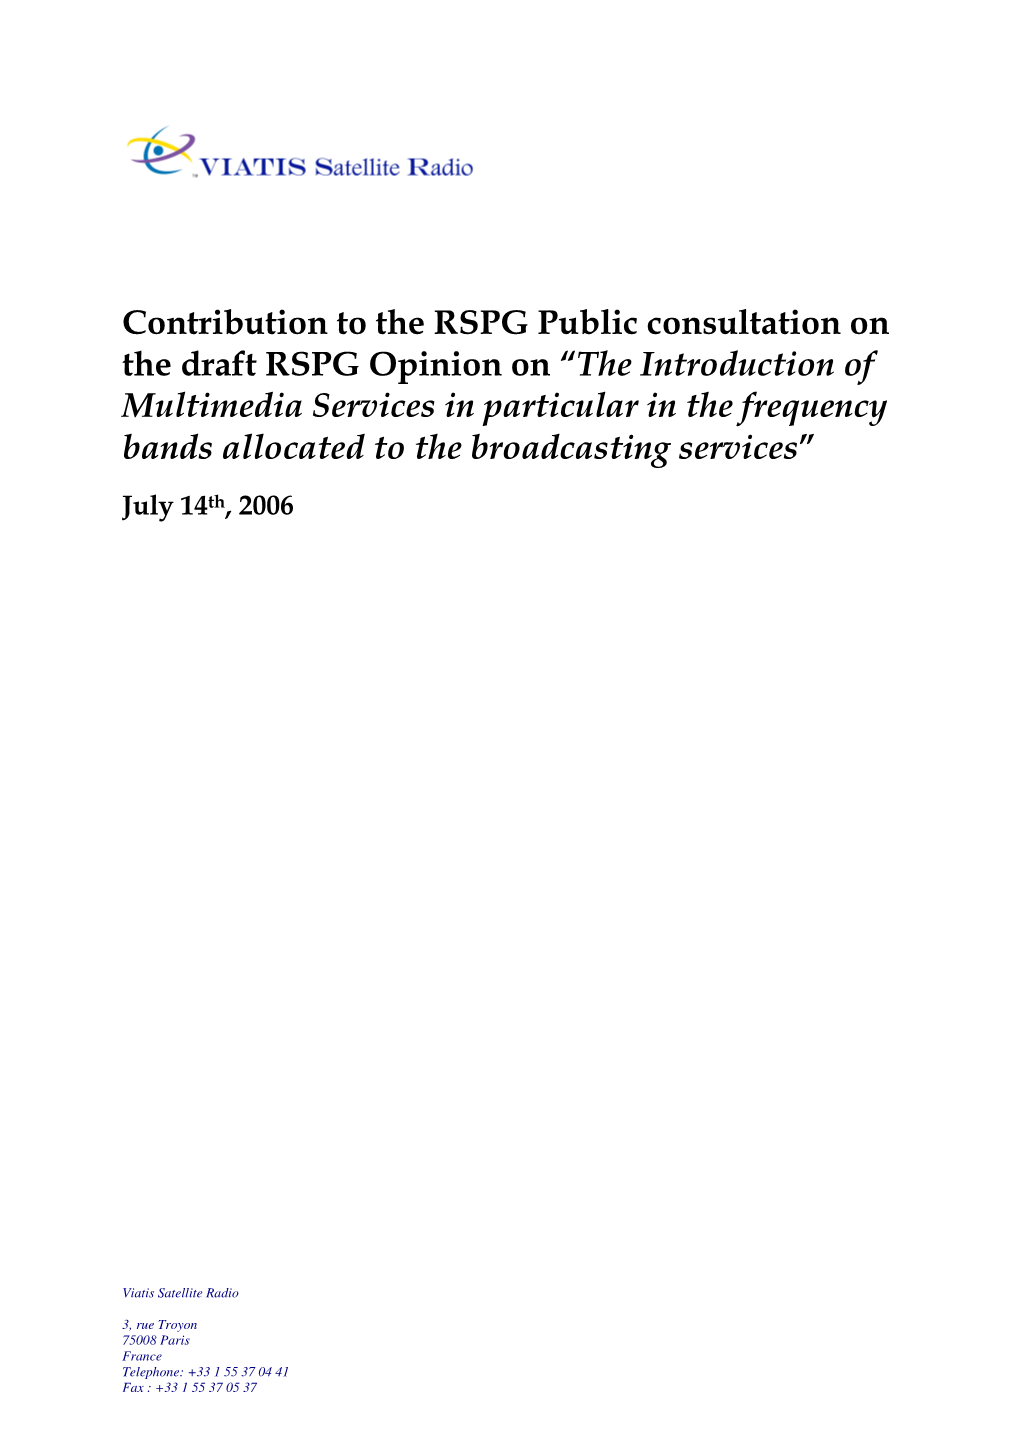 Contribution to the RSPG Public Consultation on the Draft RSPG